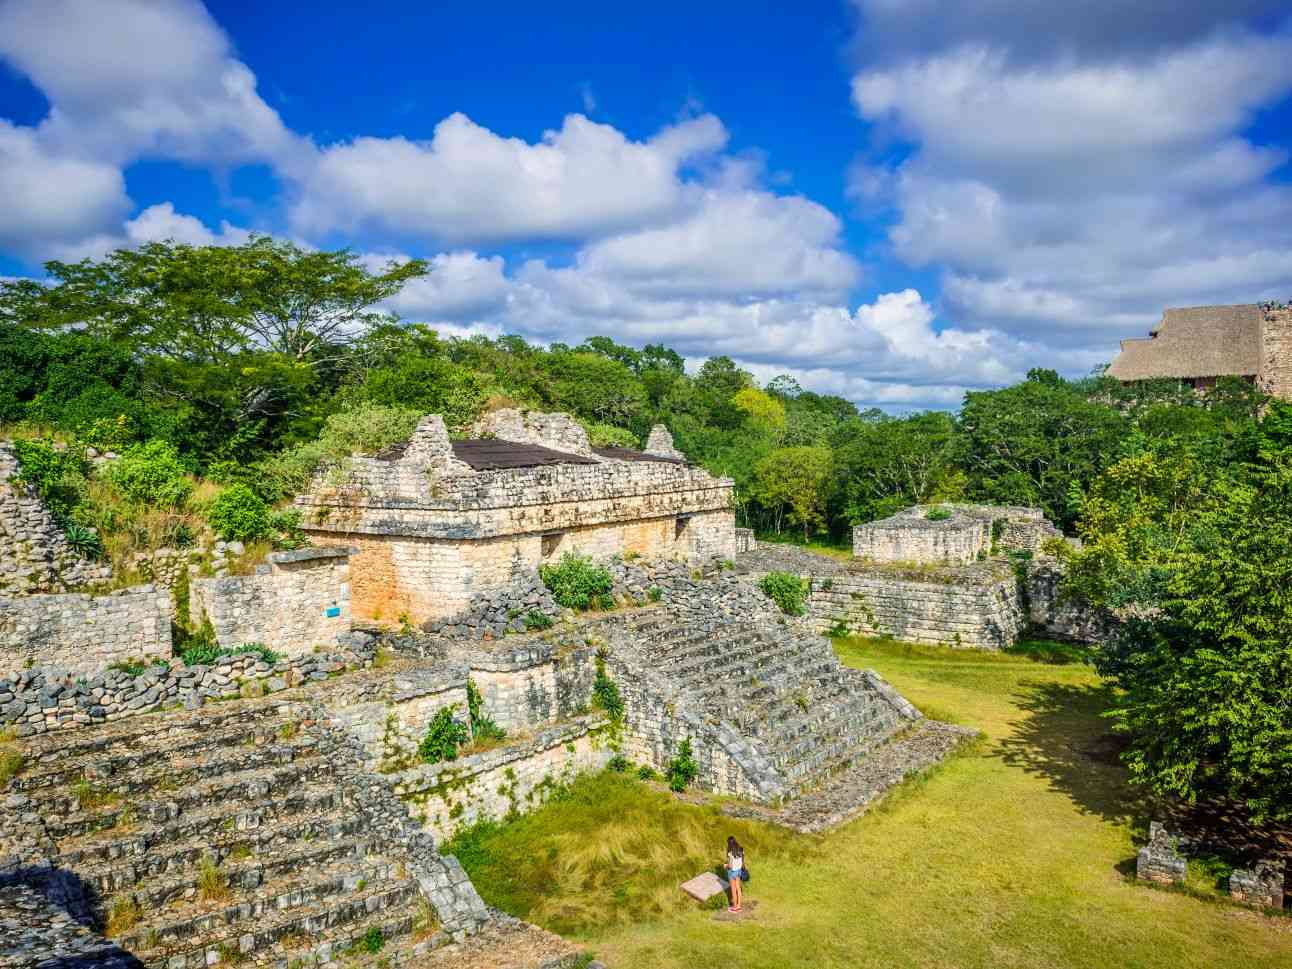 What is Balam in Mayan?